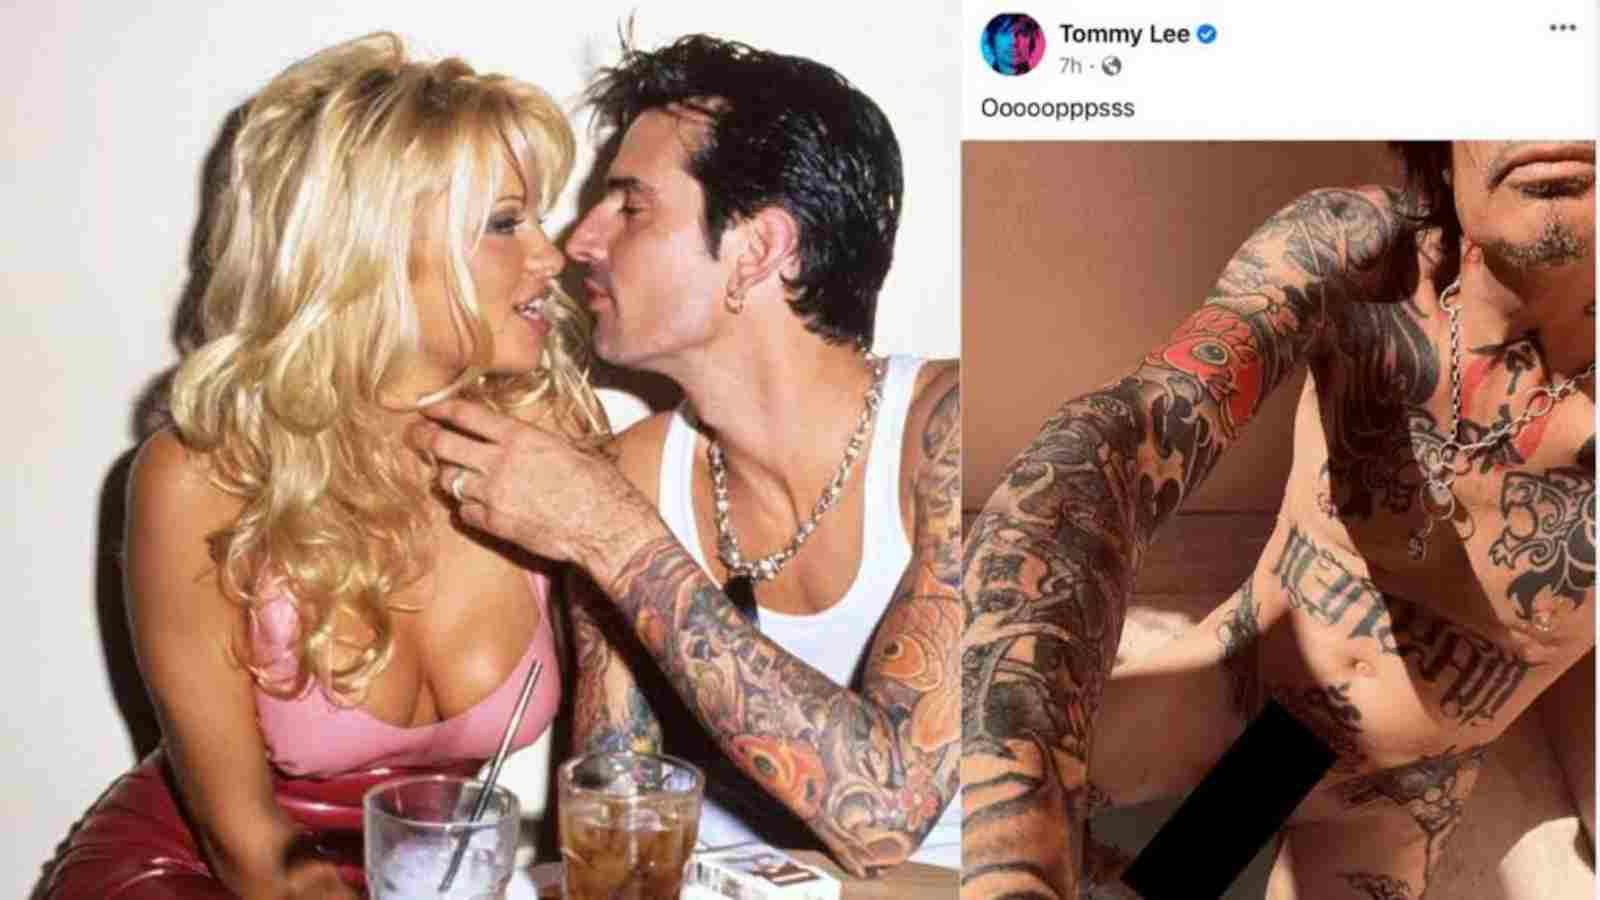 Who Is Tommy Lee And Why Is He Urging Fans To 